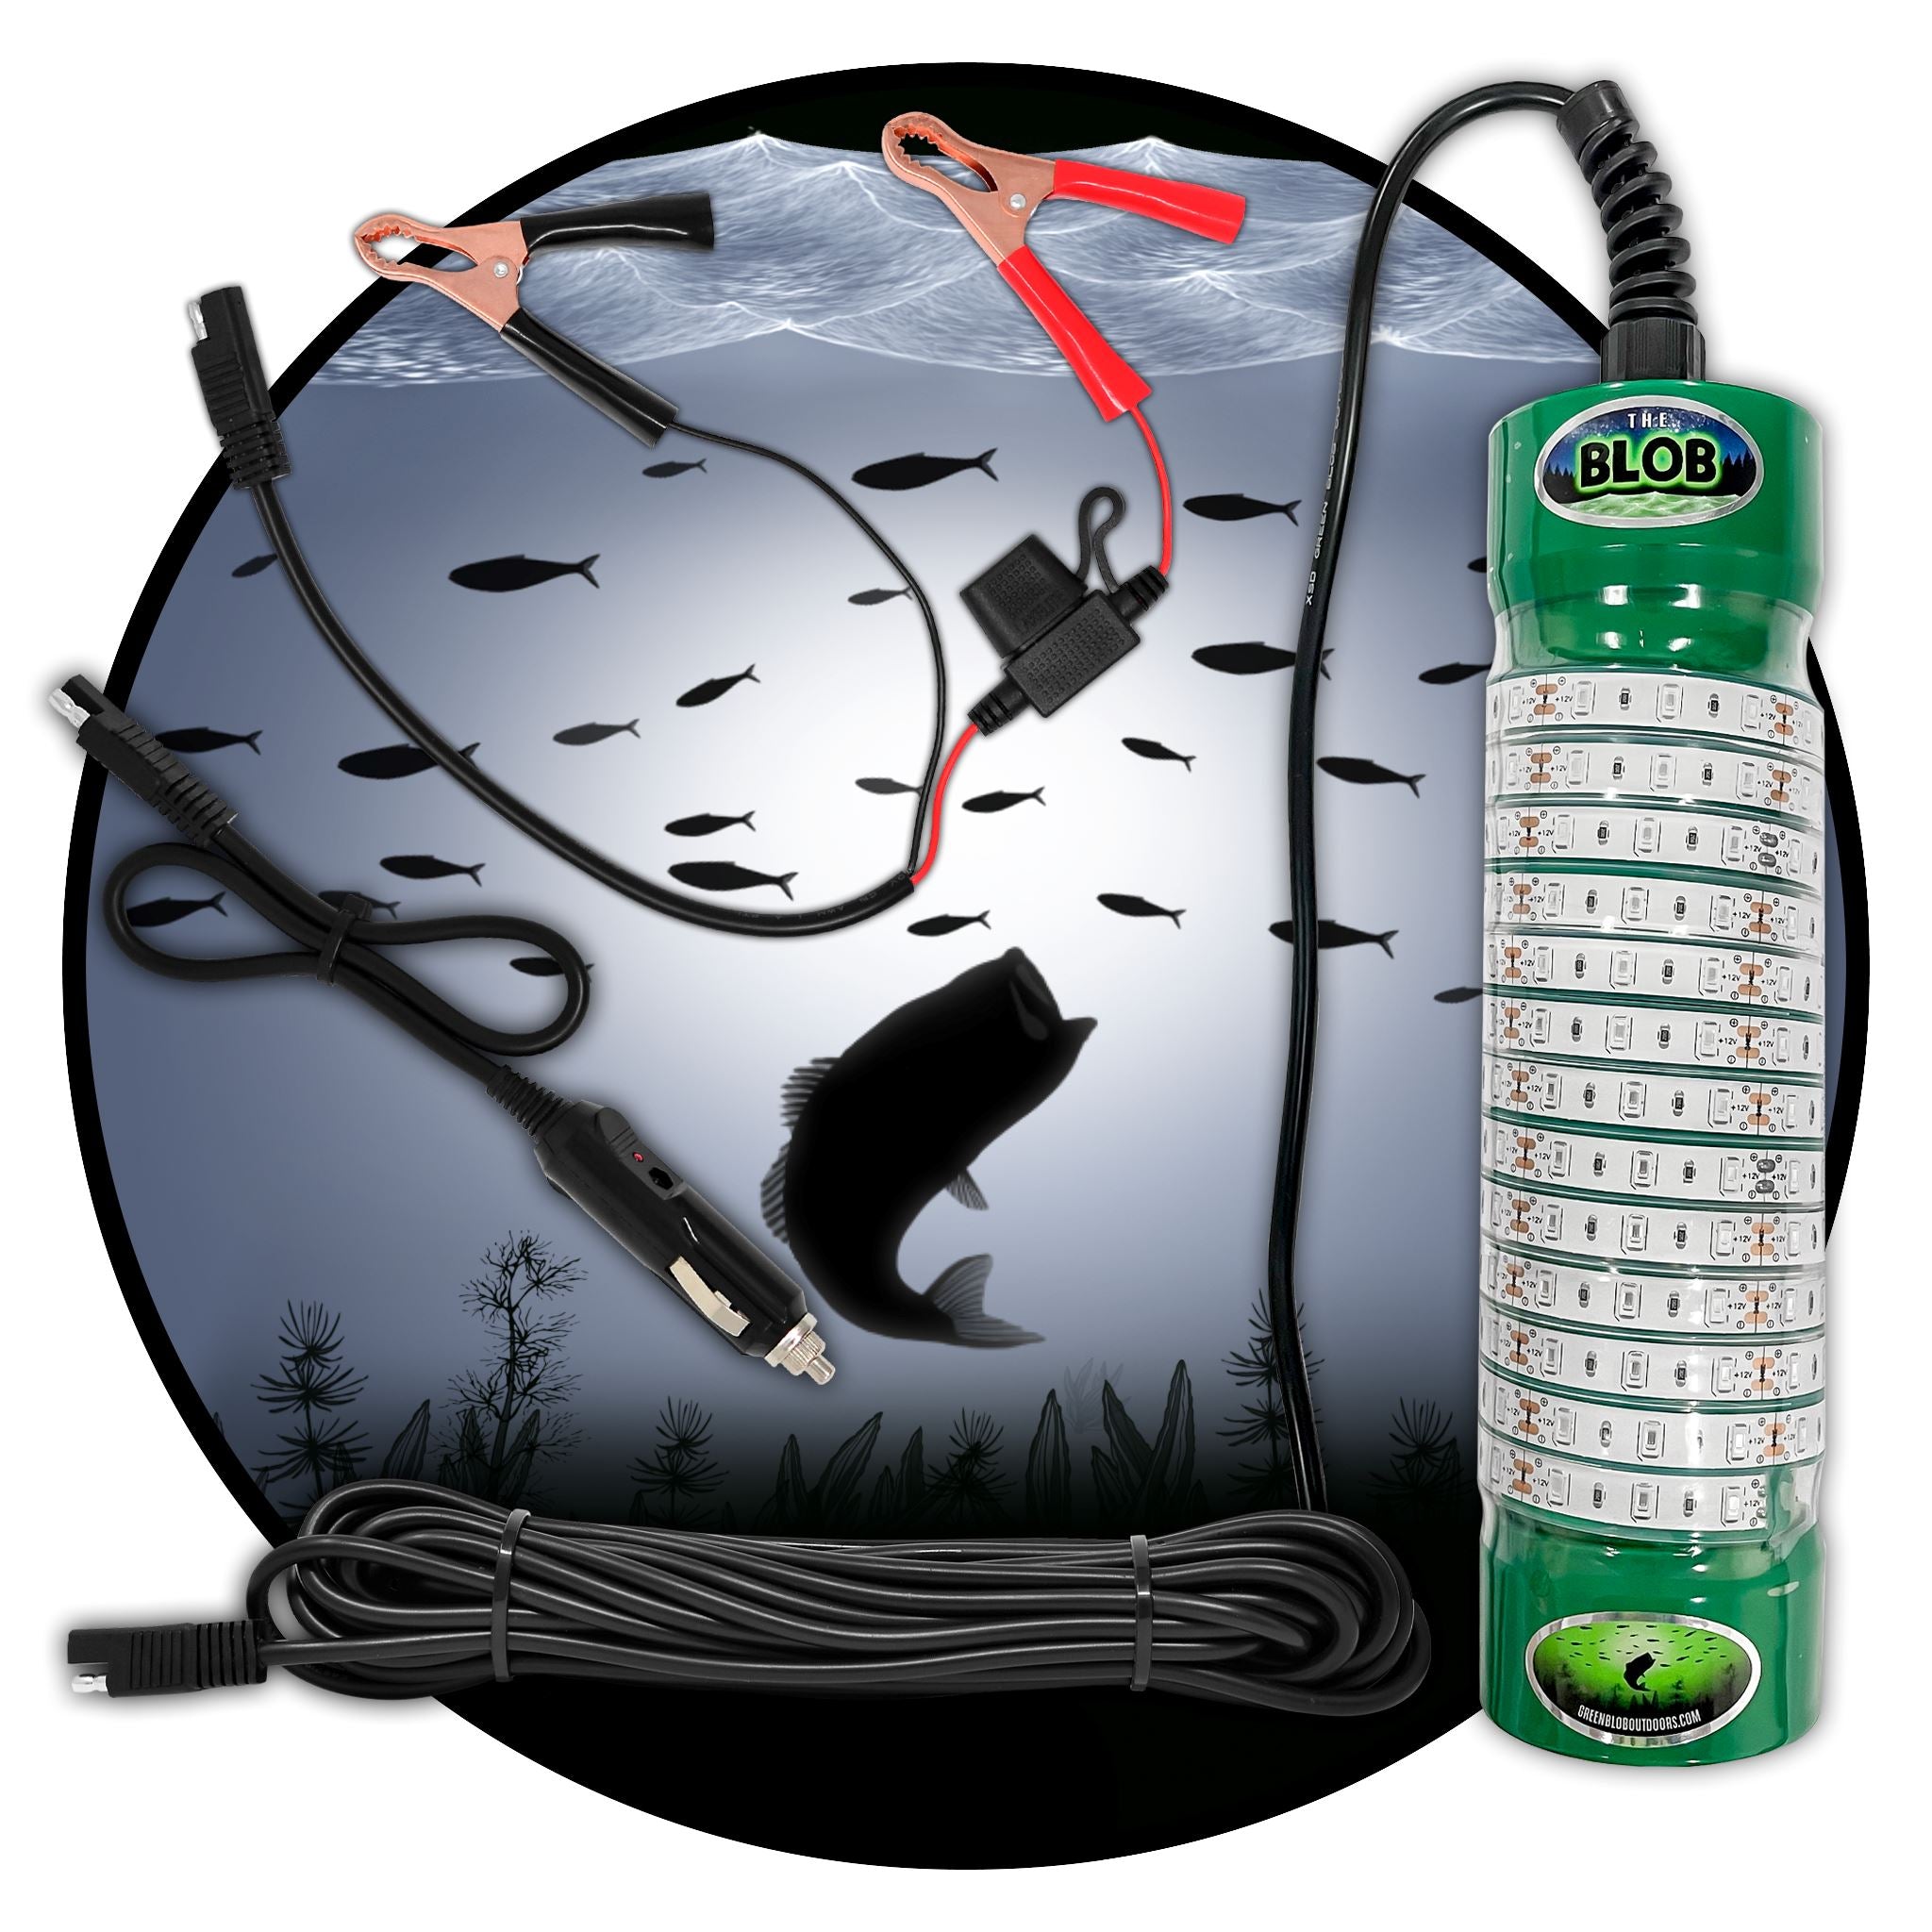 Green Blob Outdoors Underwater Fishing Light 7500 Lumen for Boats Includes Alligator Clips & Cigarette Lighter w/ 30ft Cord